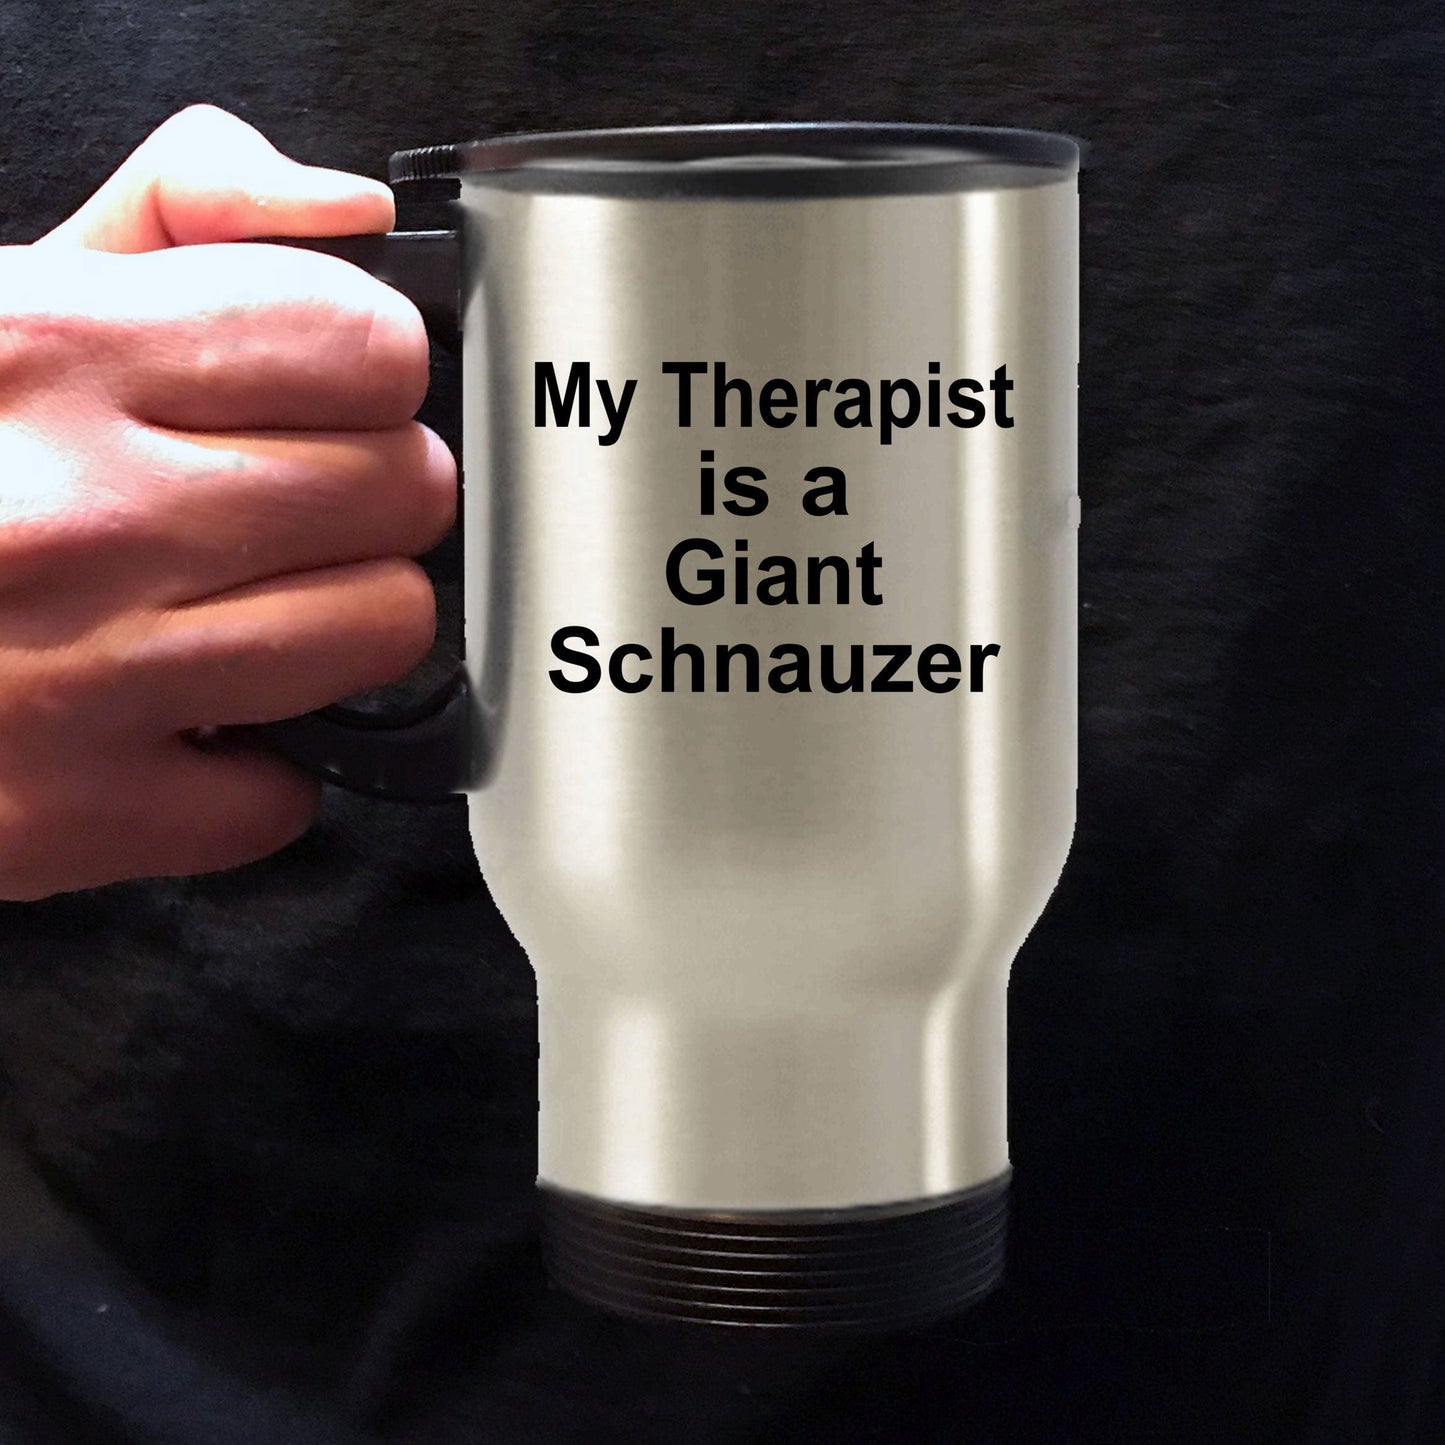 Giant Schnauzer Dog Owner Lover Funny Gift Therapist Stainless Steel Insulated Travel Coffee Mug